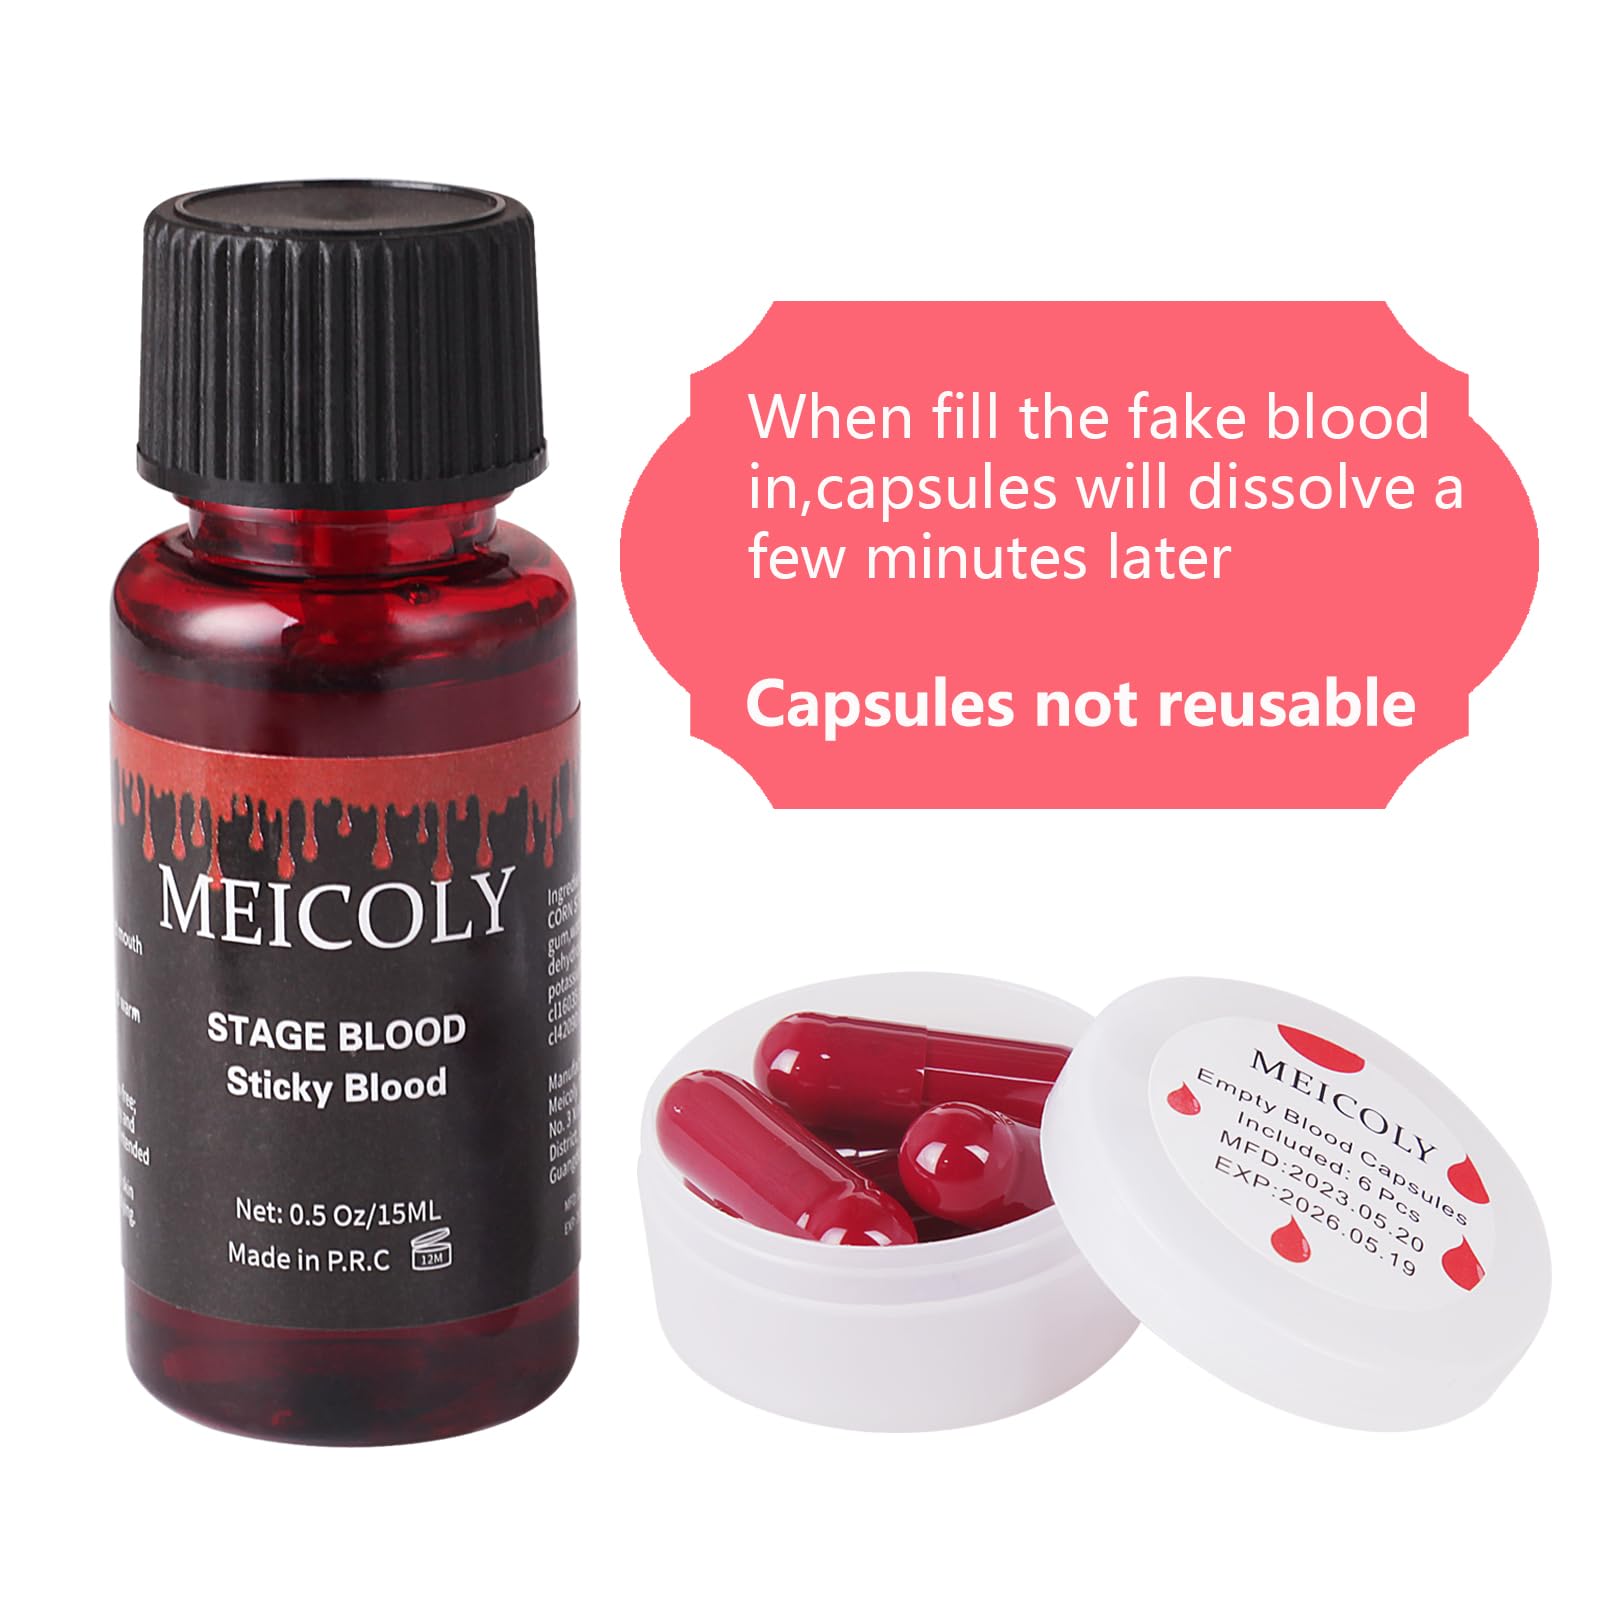 MEICOLY Fake Blood Washable,Edible Stage Blood,0.5 oz Realistic Drips Sticky Fake Blood with Brush,Safe for Mouth,Teeth,Nosebleed,Halloween,Cosplay,Scar,Wound Bites SFX Makeup,Special Effects,Bright